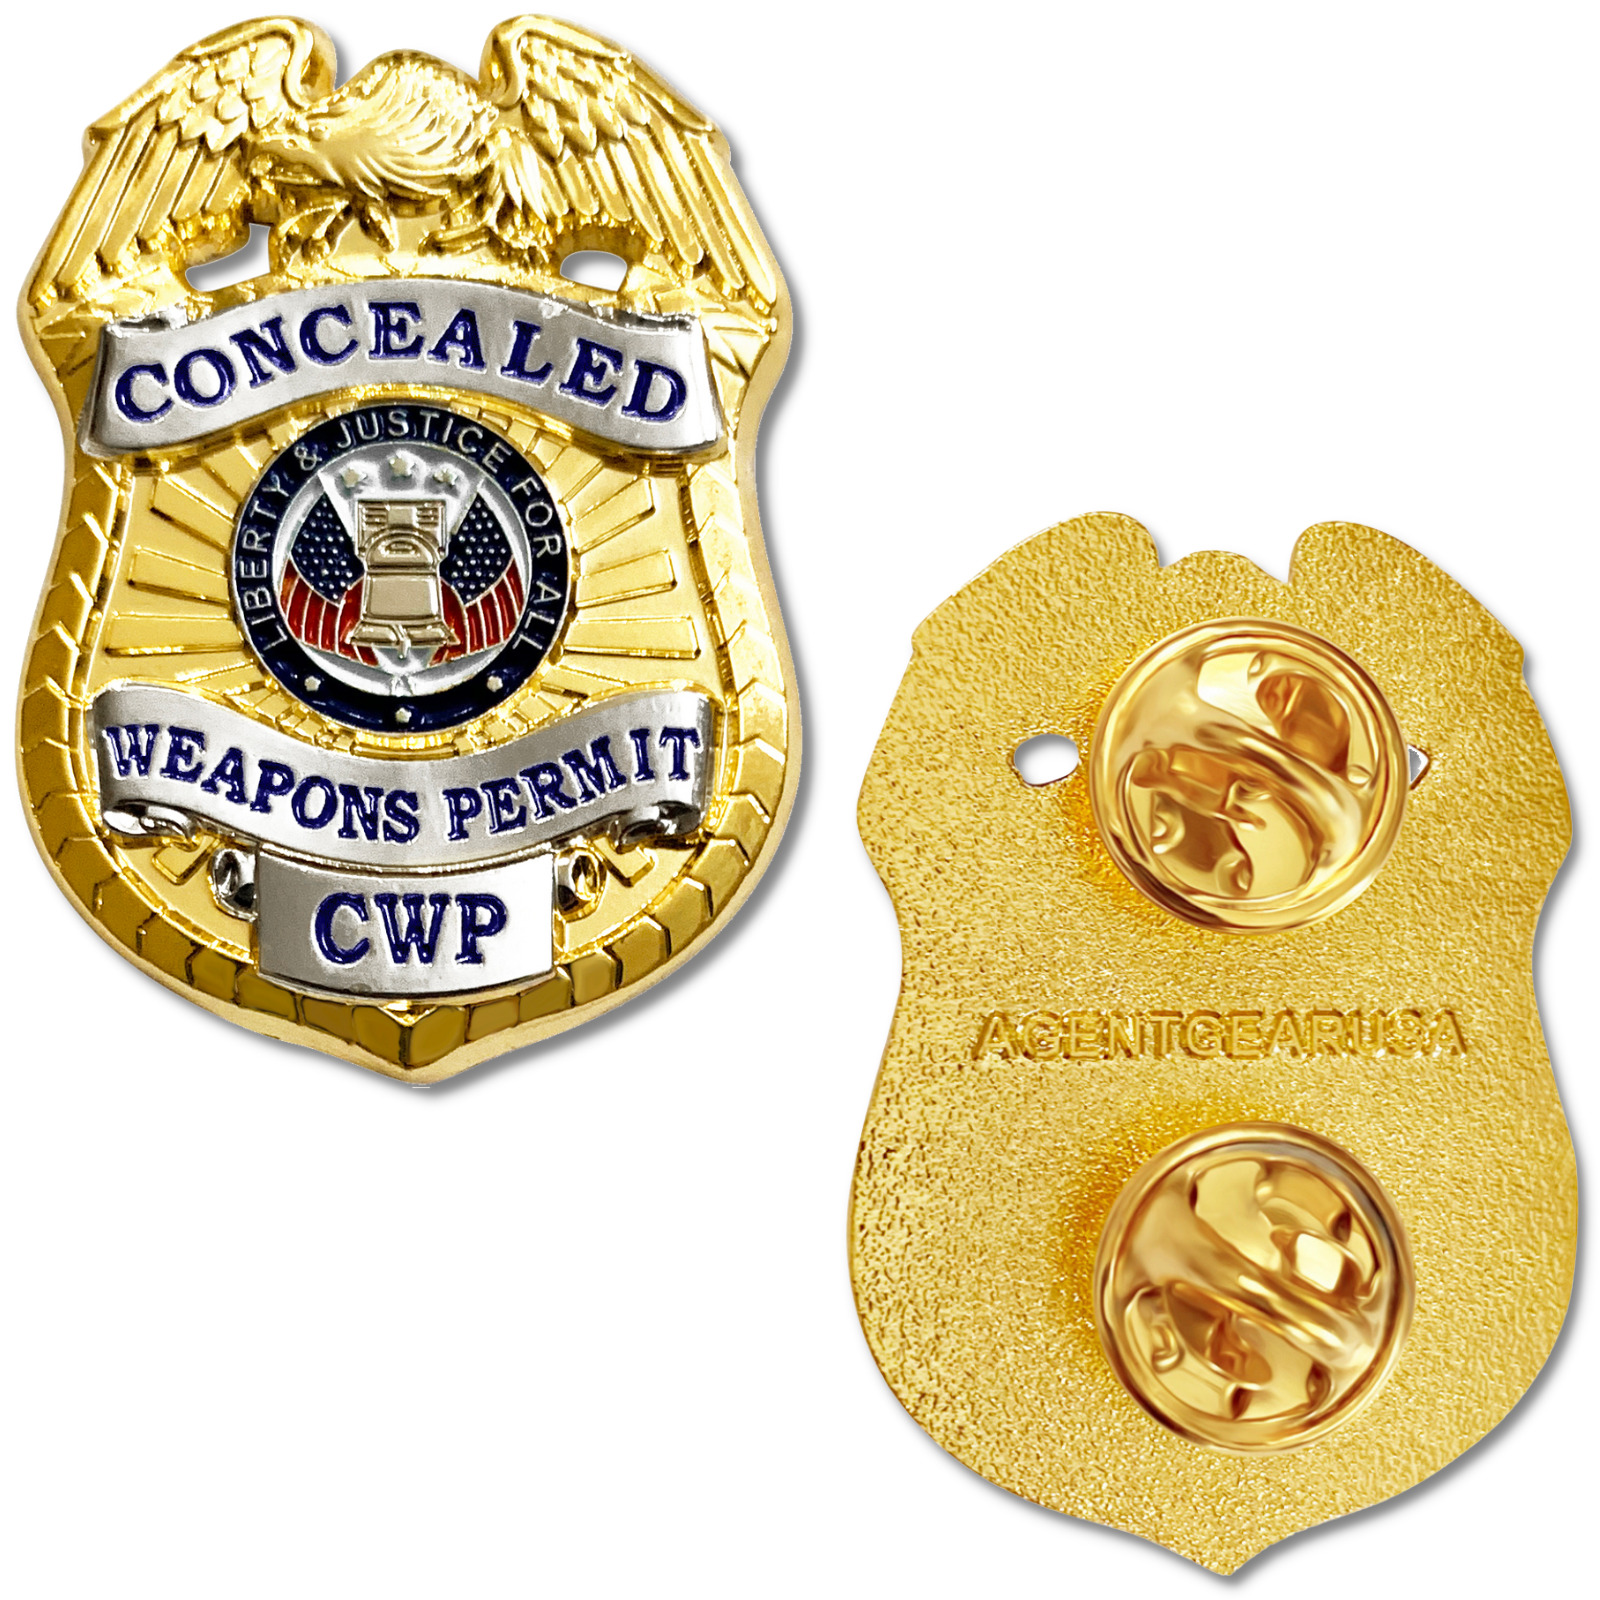 Concealed Weapon Permits Pin - Second Amendment Novelty - Eagle Patriotic Pin